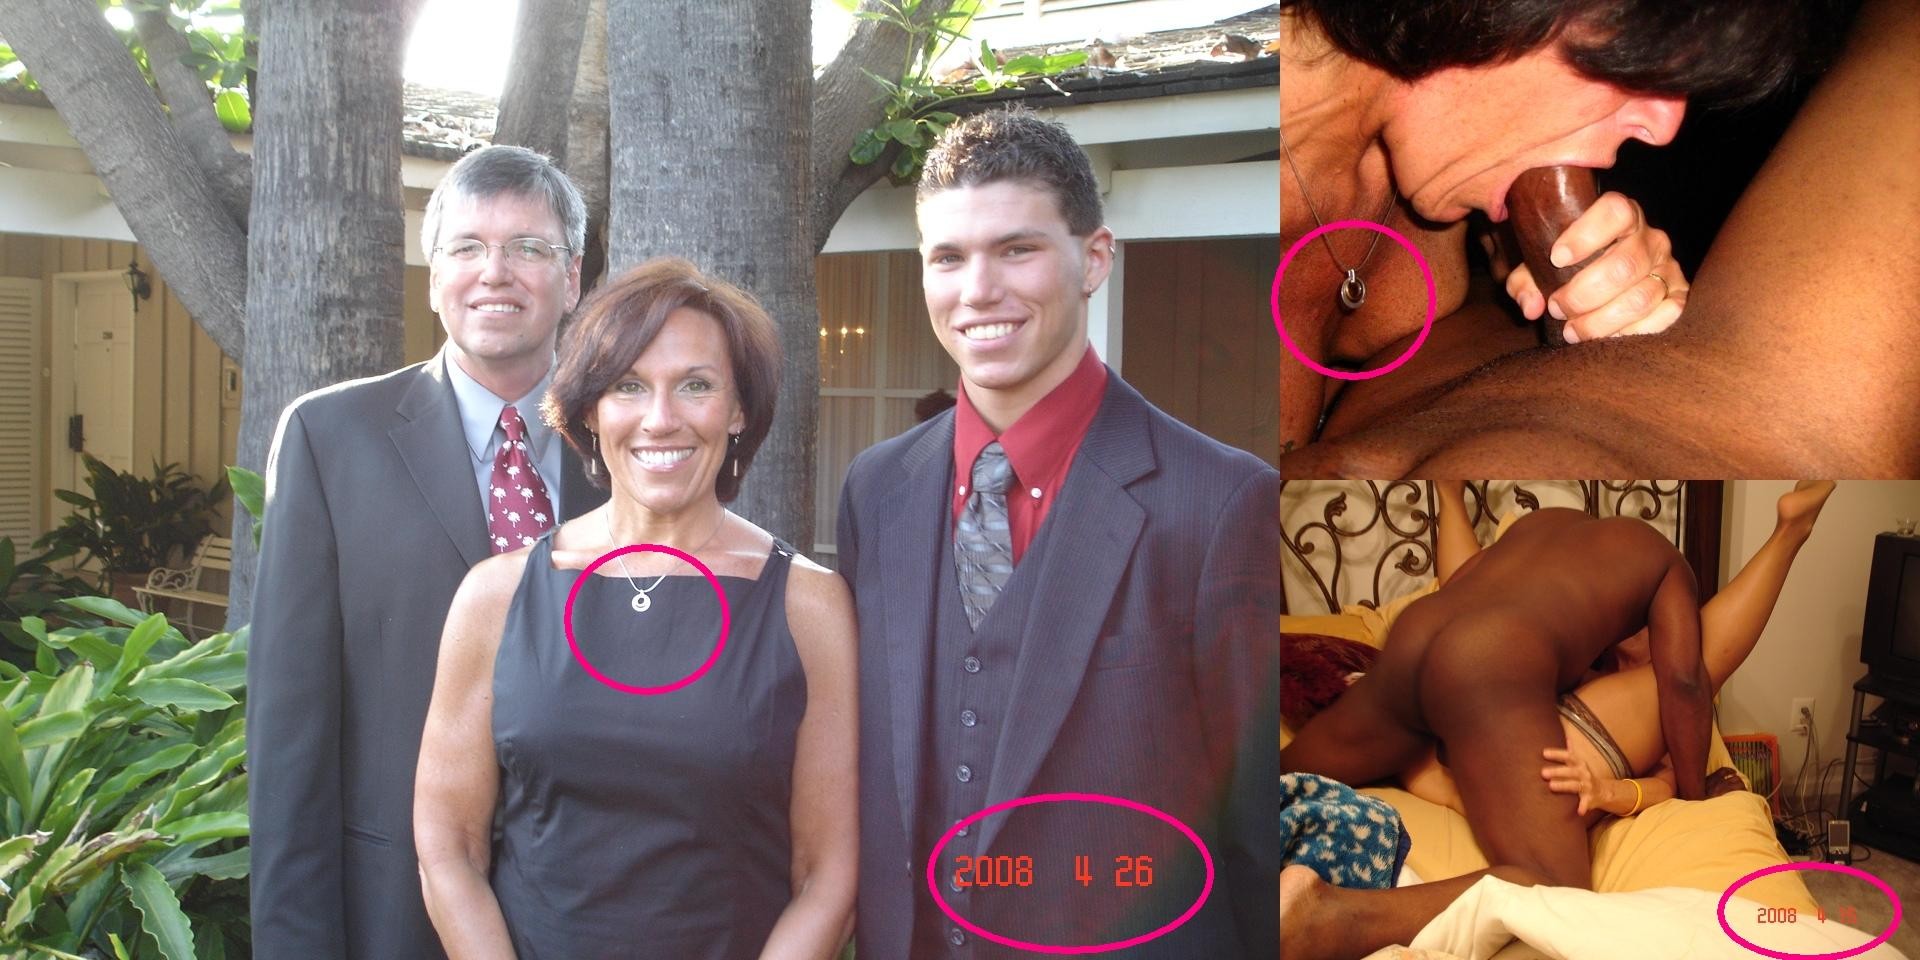 Amateur Interracial Before After - Hot mom blacked after taking family pictures at ...